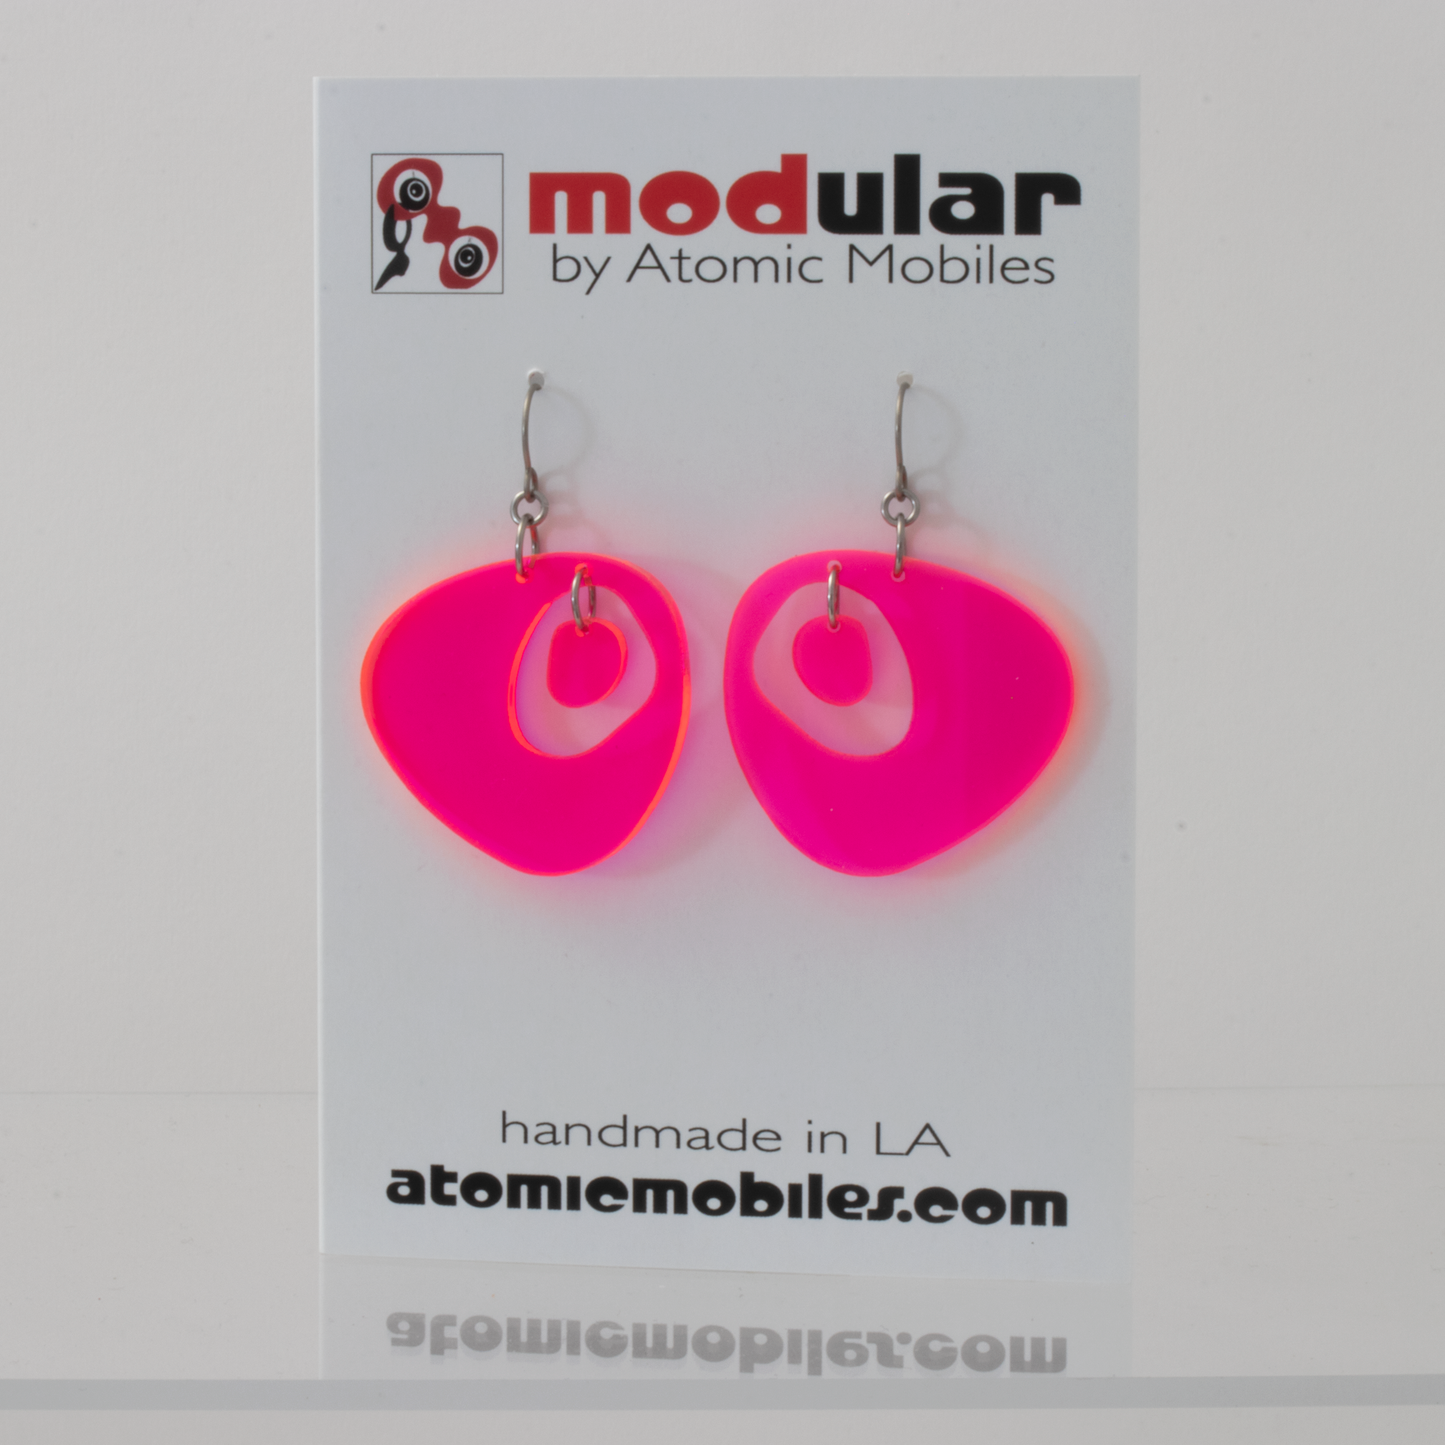 Googie 1970s Mid Century Modern Style Earrings in Neon Fluorescent Hot Pink plexiglass acrylic by AtomicMobiles.com